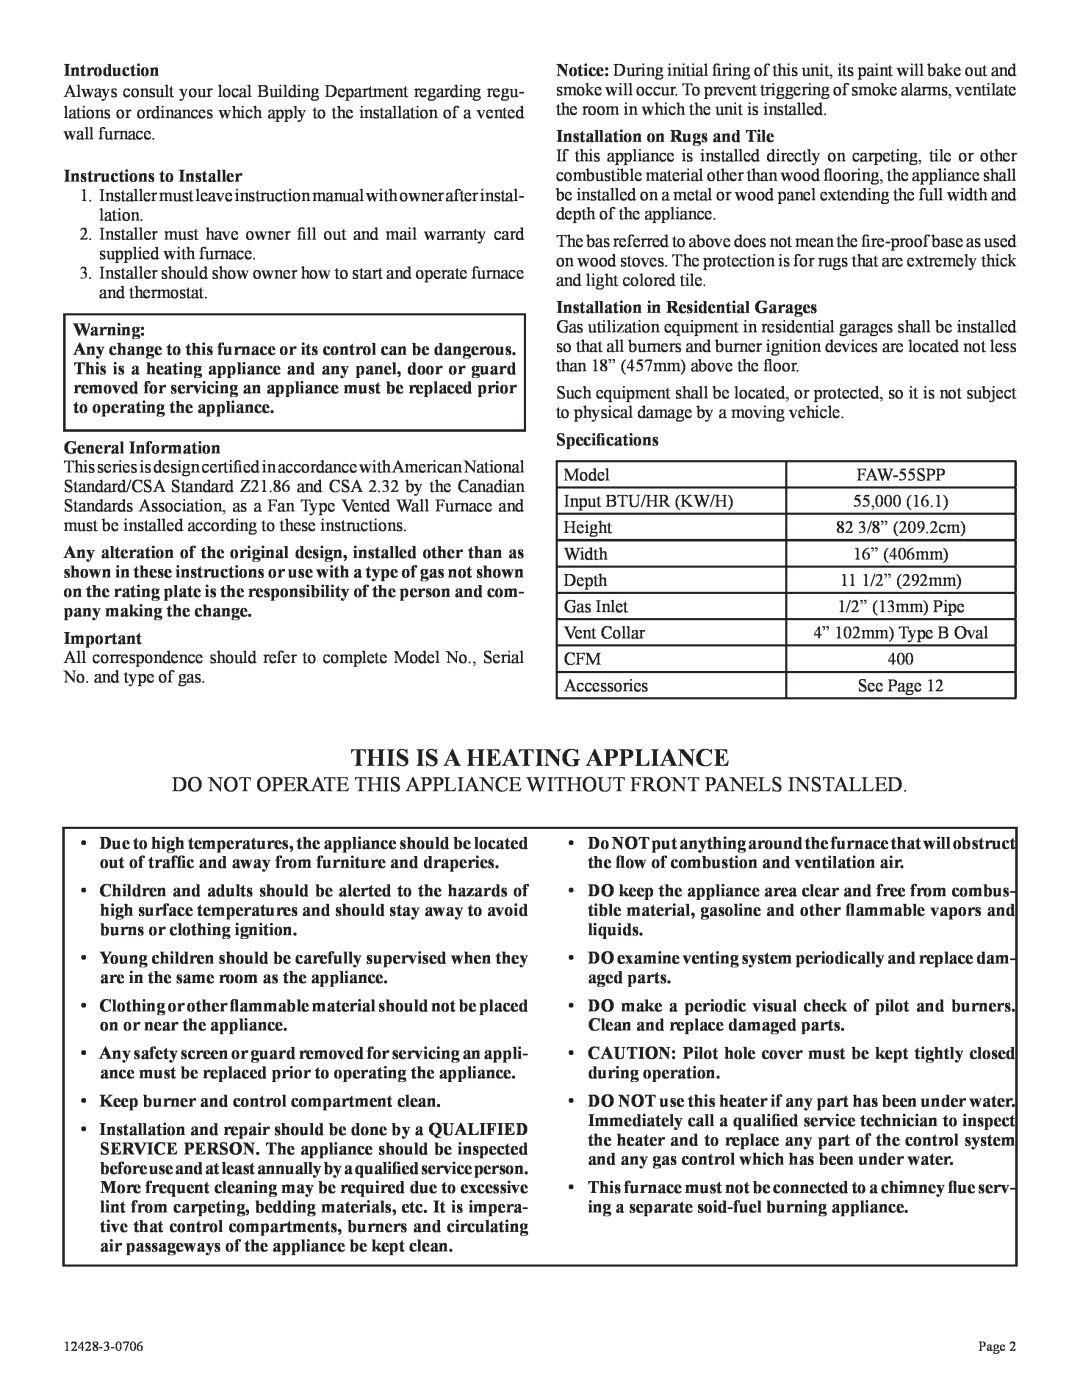 Empire Comfort Systems FAW-55SPP installation instructions This Is A Heating Appliance 